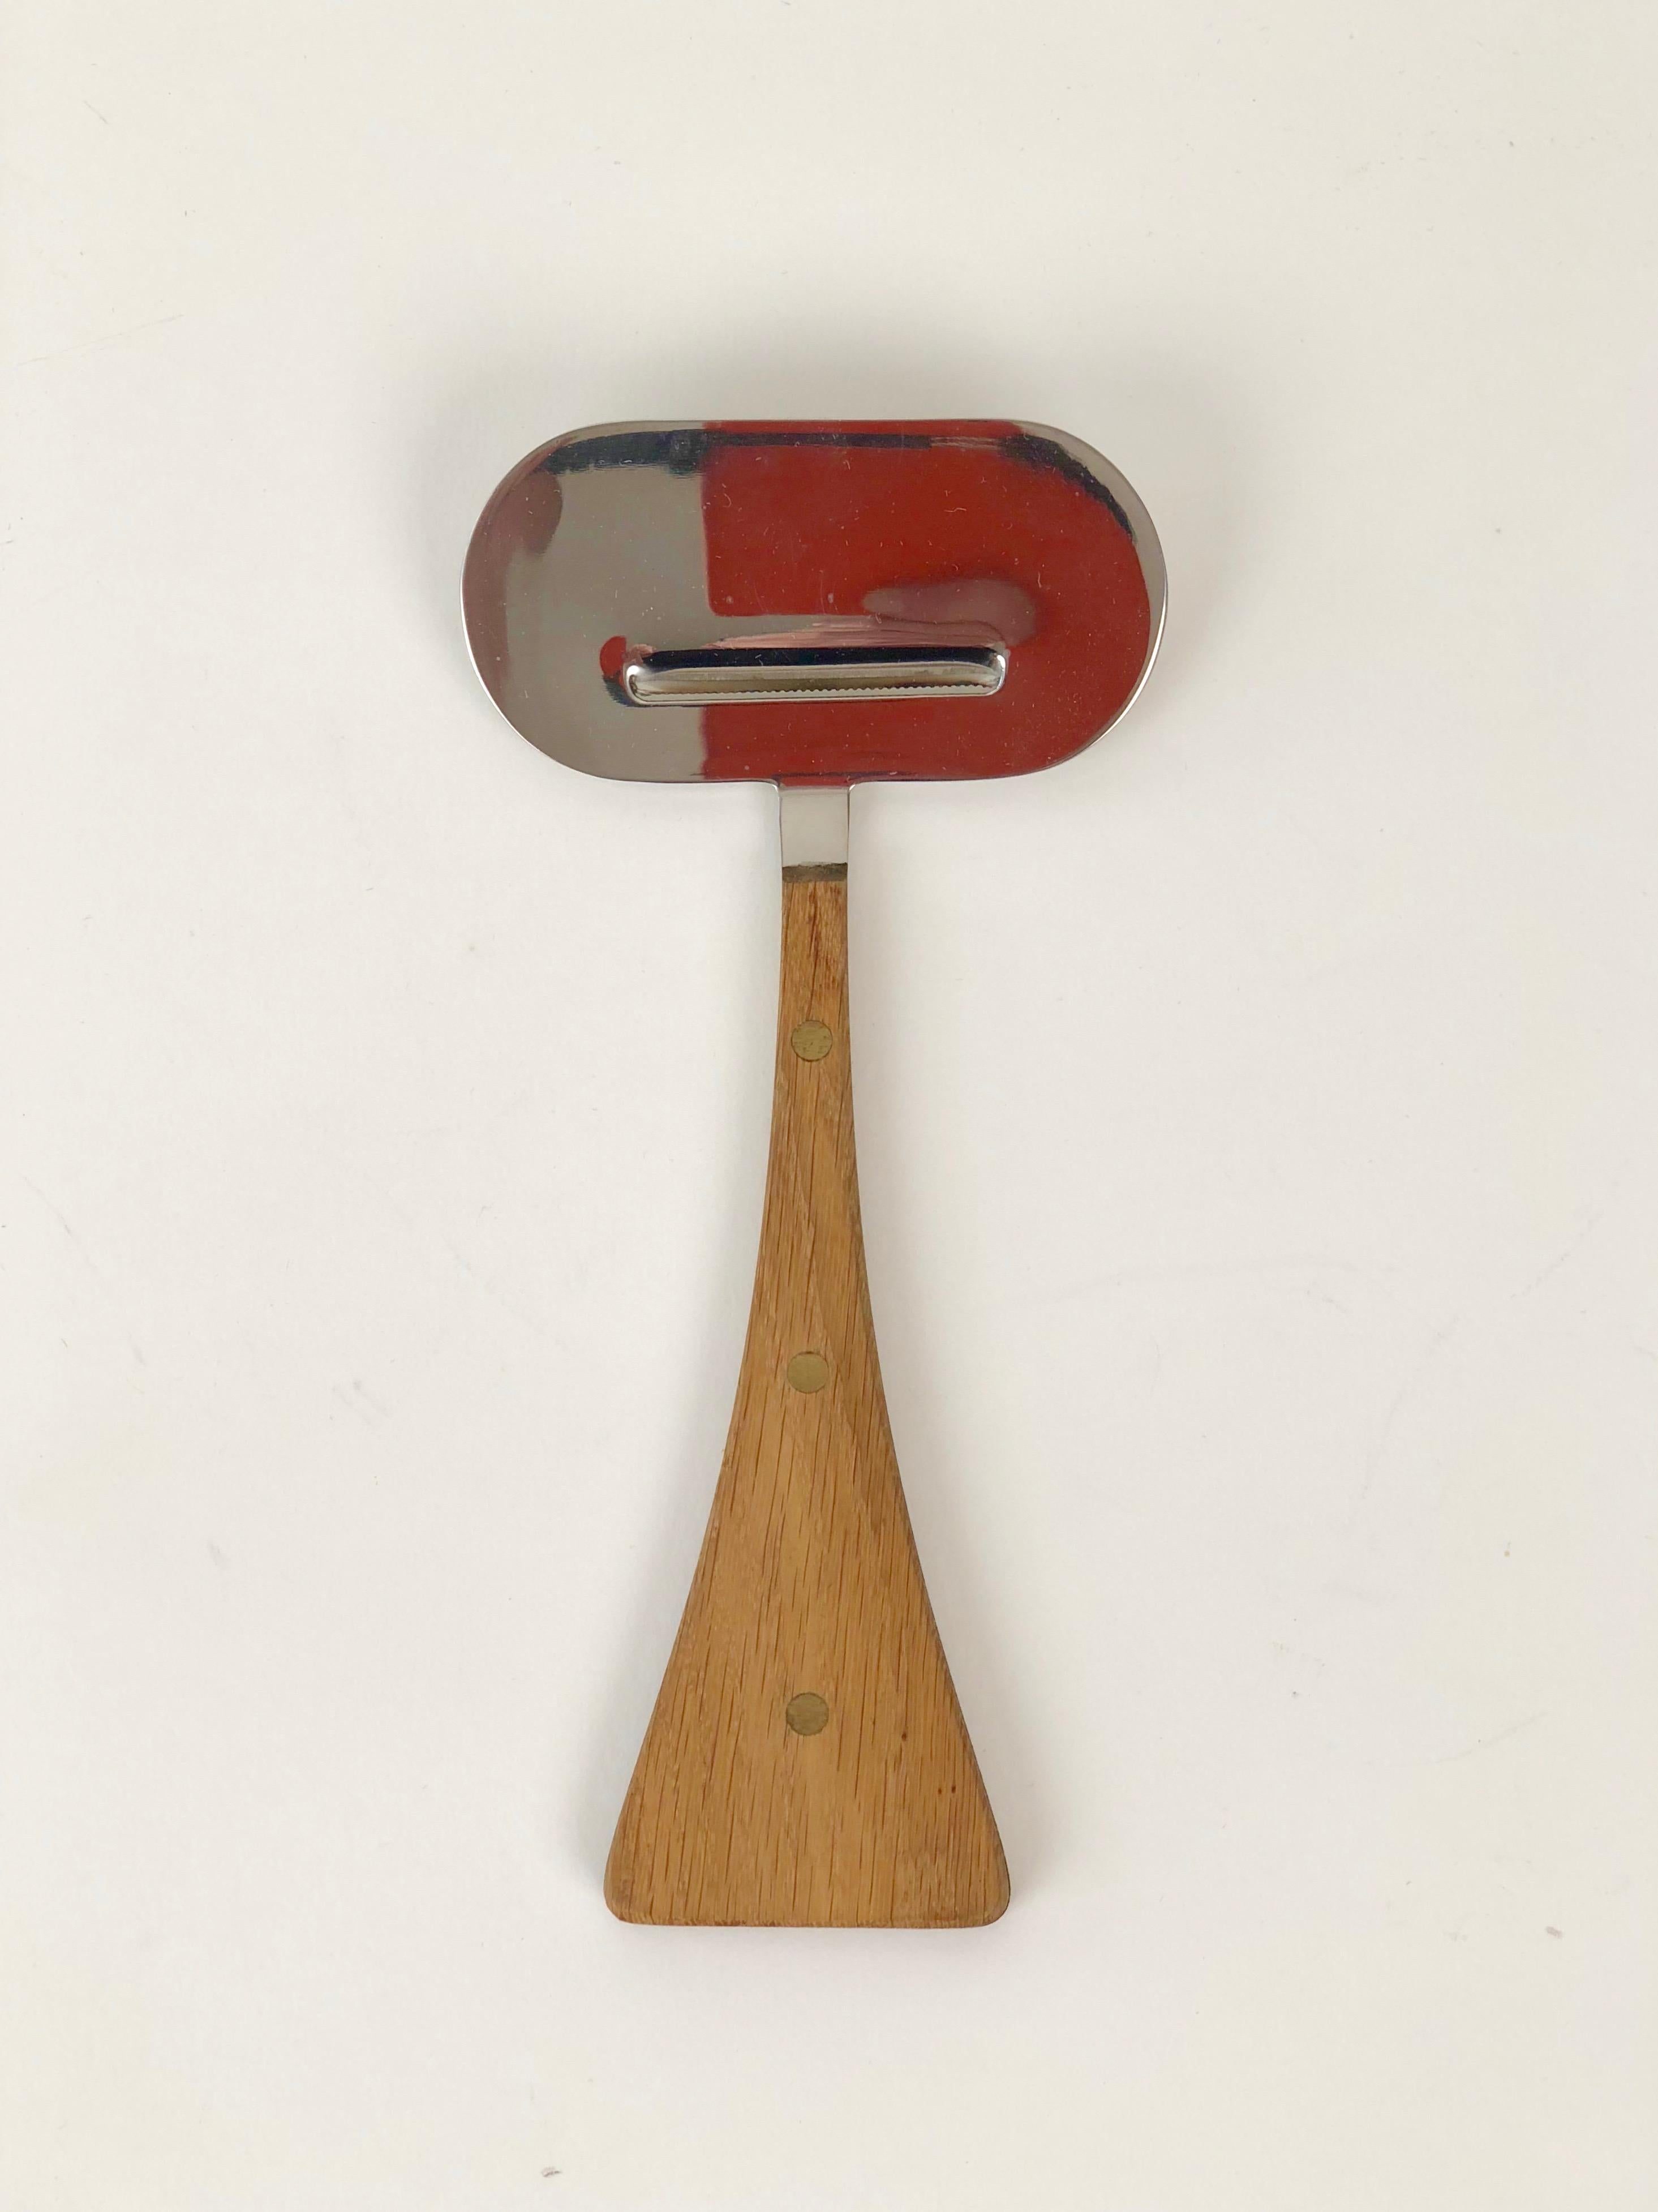 A midcentury cheese slicer designed by Janos Megyik for Amboss Austria. This is boxed set and as one can see, in wonderful condition.
Includes original forged nails for installation on the wall. What a great accessory for a modernist kitchen.